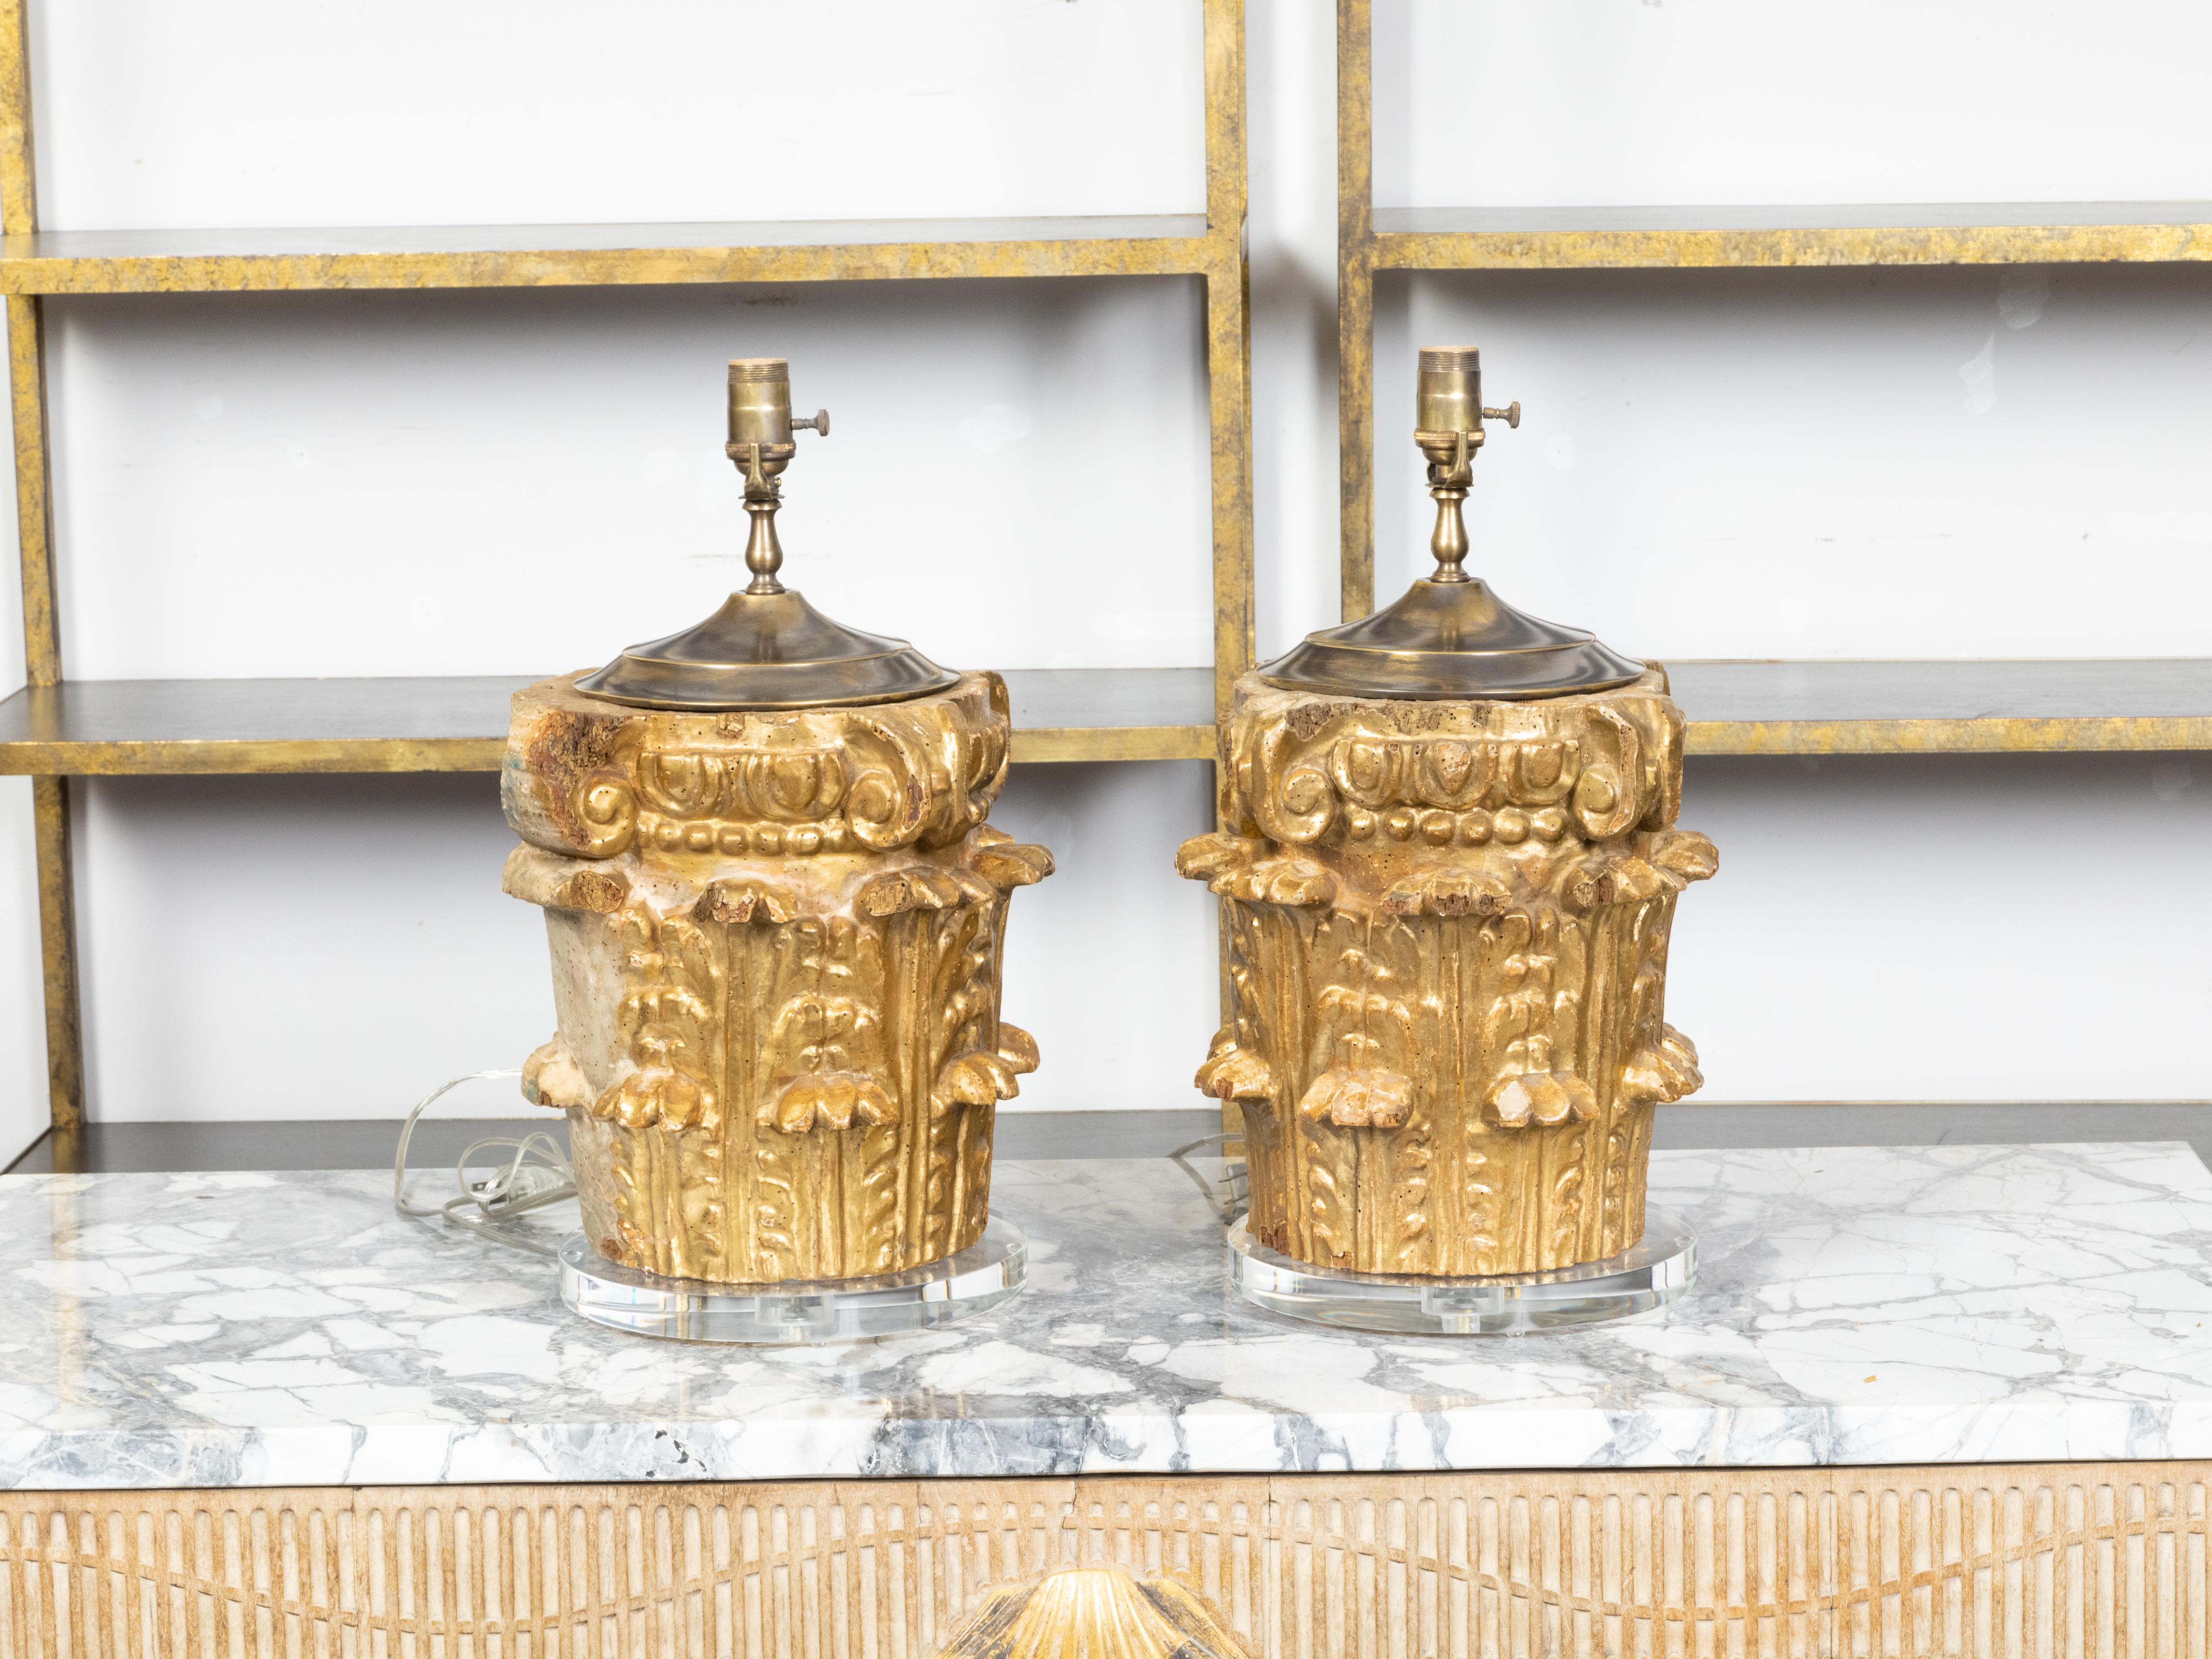 Italian 19th Century Carved Giltwood Composite Capitals Made into Table Lamps For Sale 1